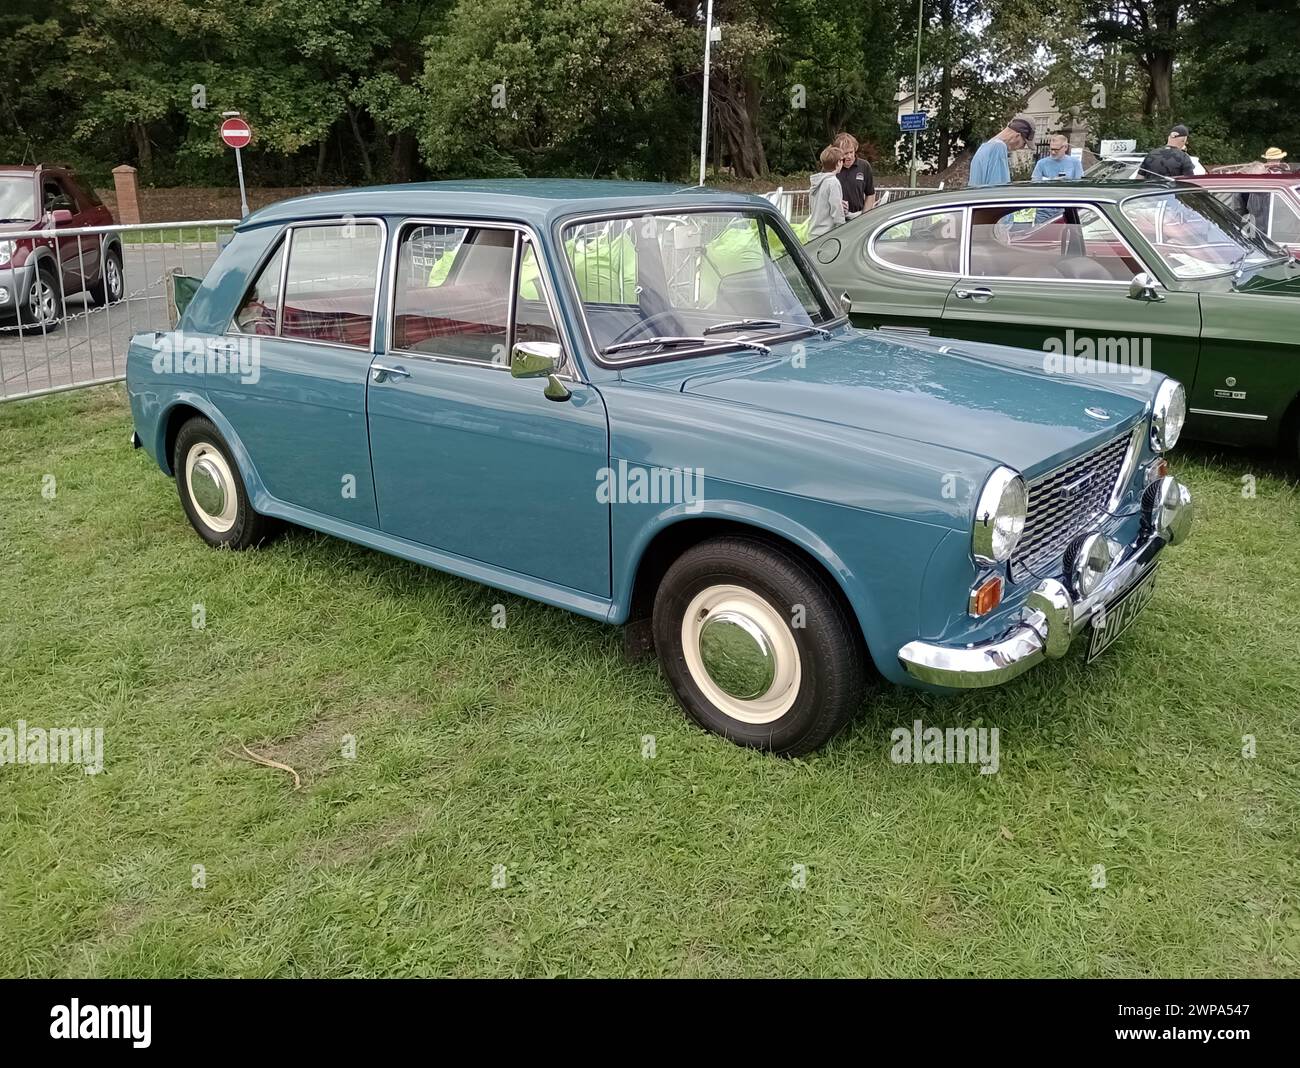 A 1966 Austin 1100 parked up on display at the English Riviera classic car show Paignton, Devon, England, UK. Stock Photo